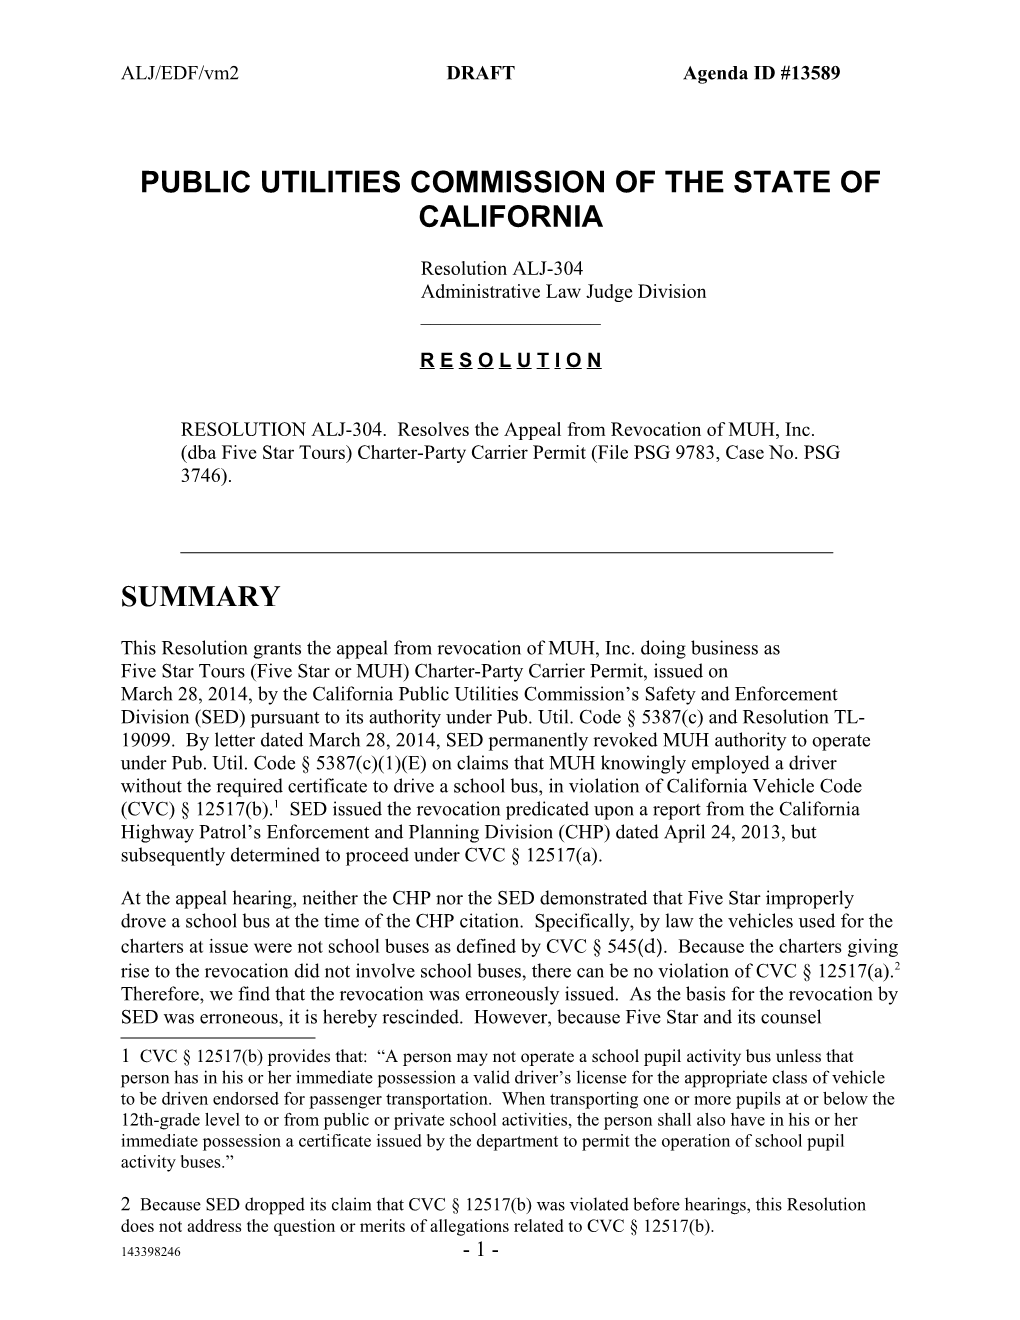 Public Utilities Commission of the State of California s126